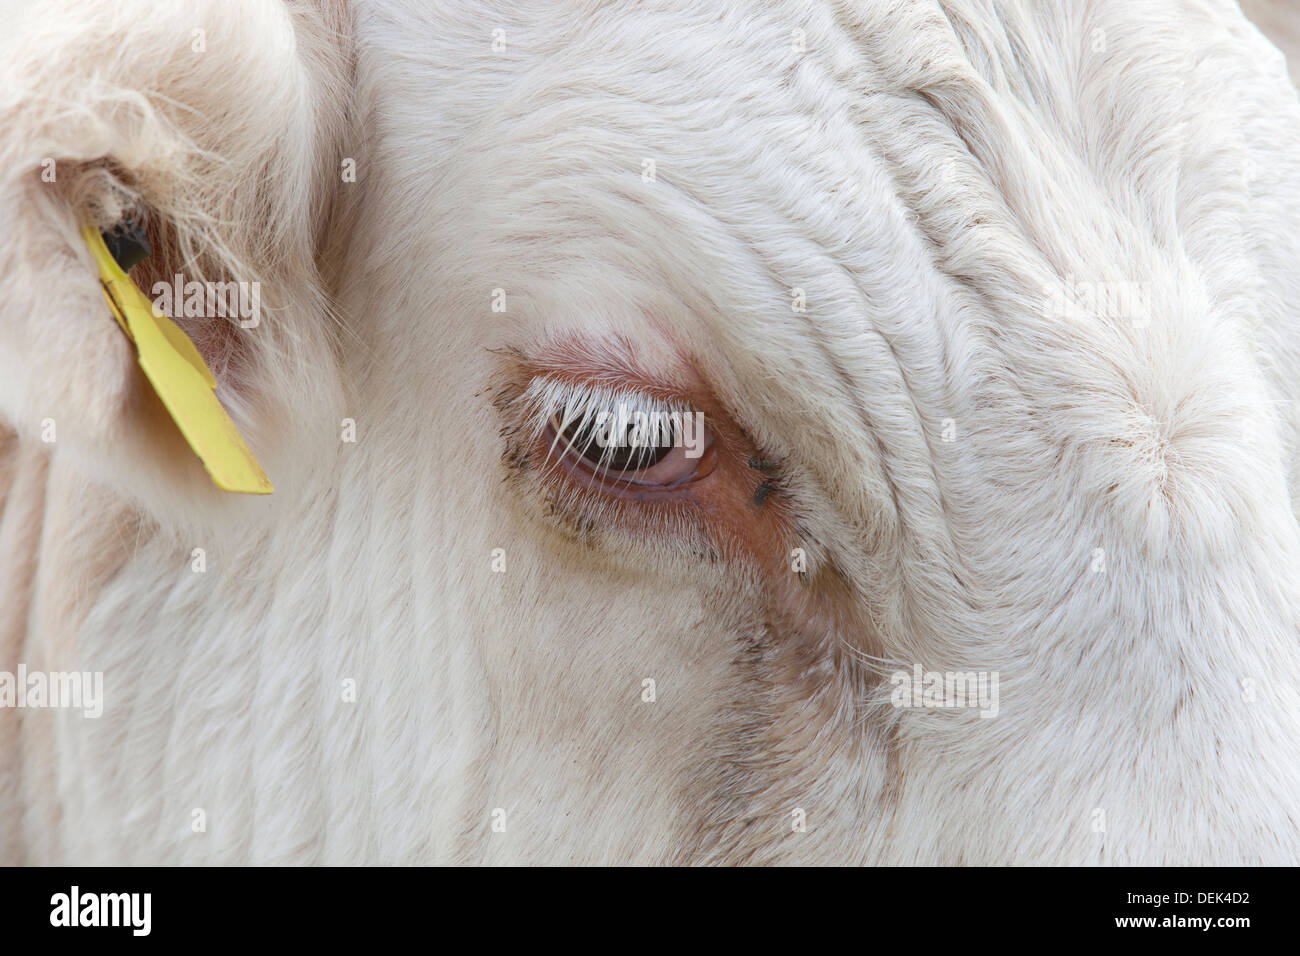 Close-up view a Cow's eye Essex, United Kingdom Stock Photo